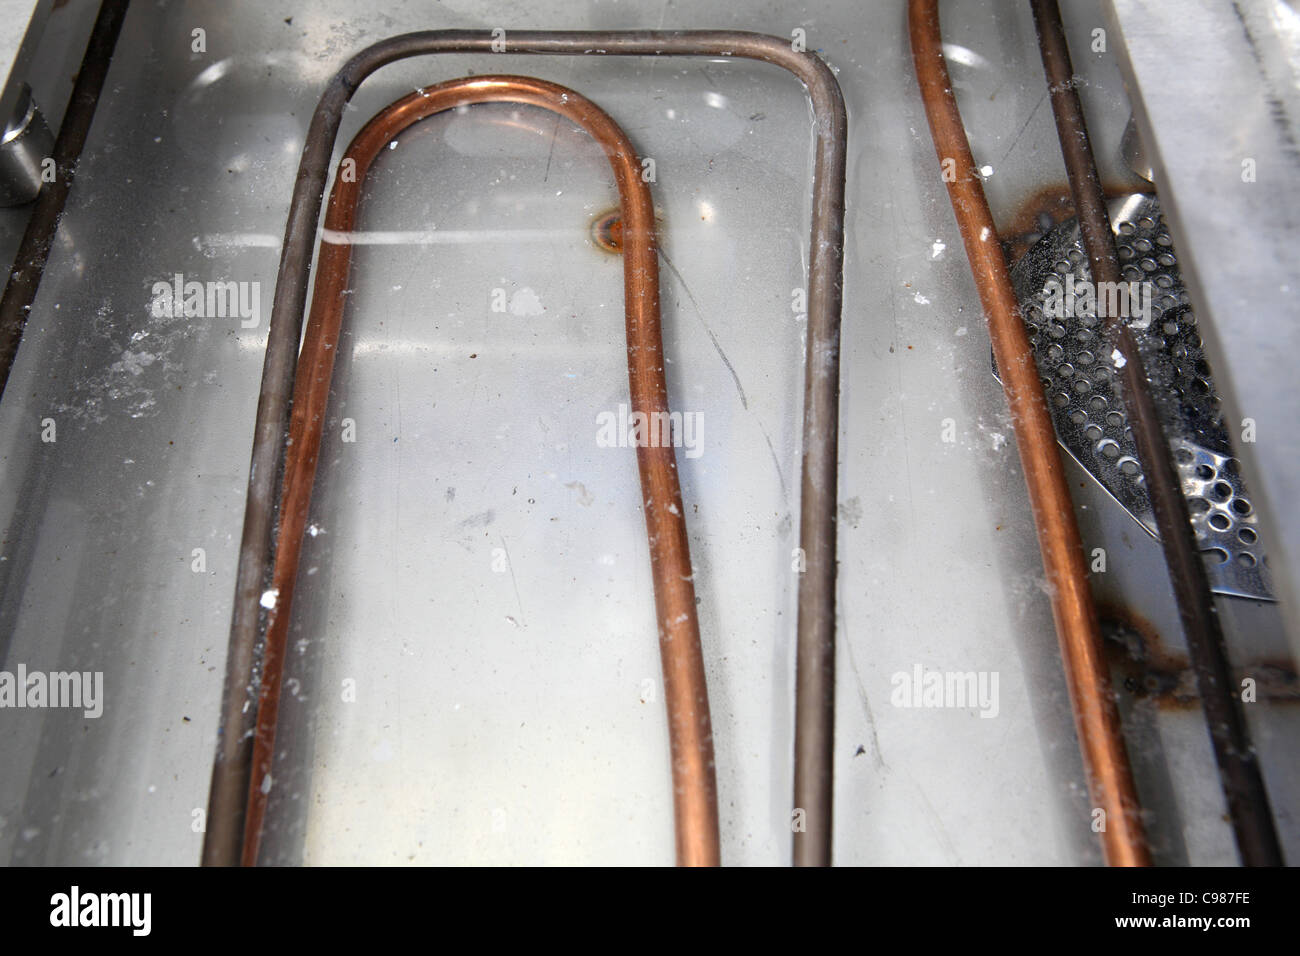 Immersion heater element in water Stock Photo